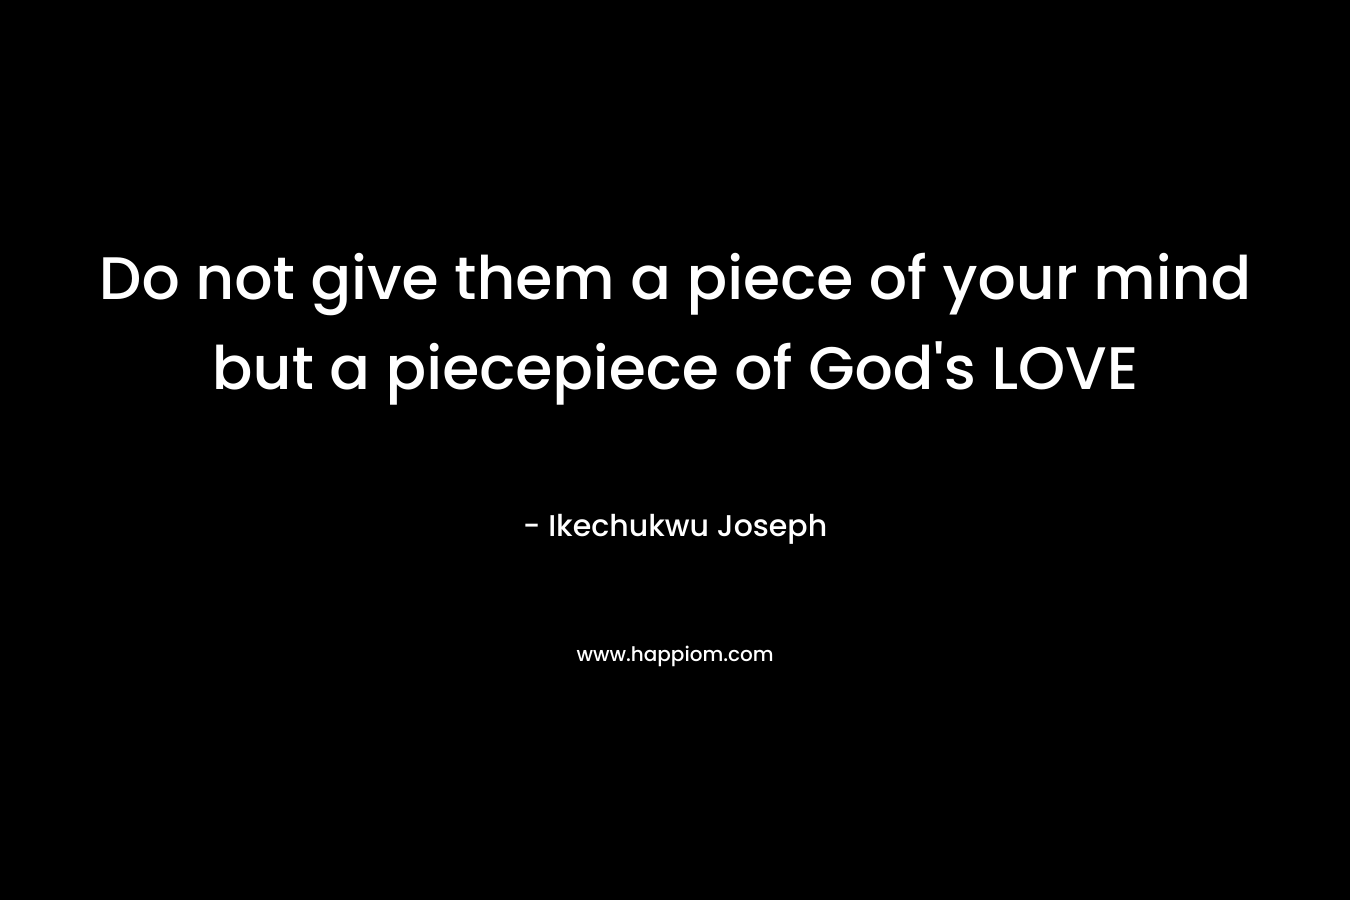 Do not give them a piece of your mind but a piecepiece of God's LOVE